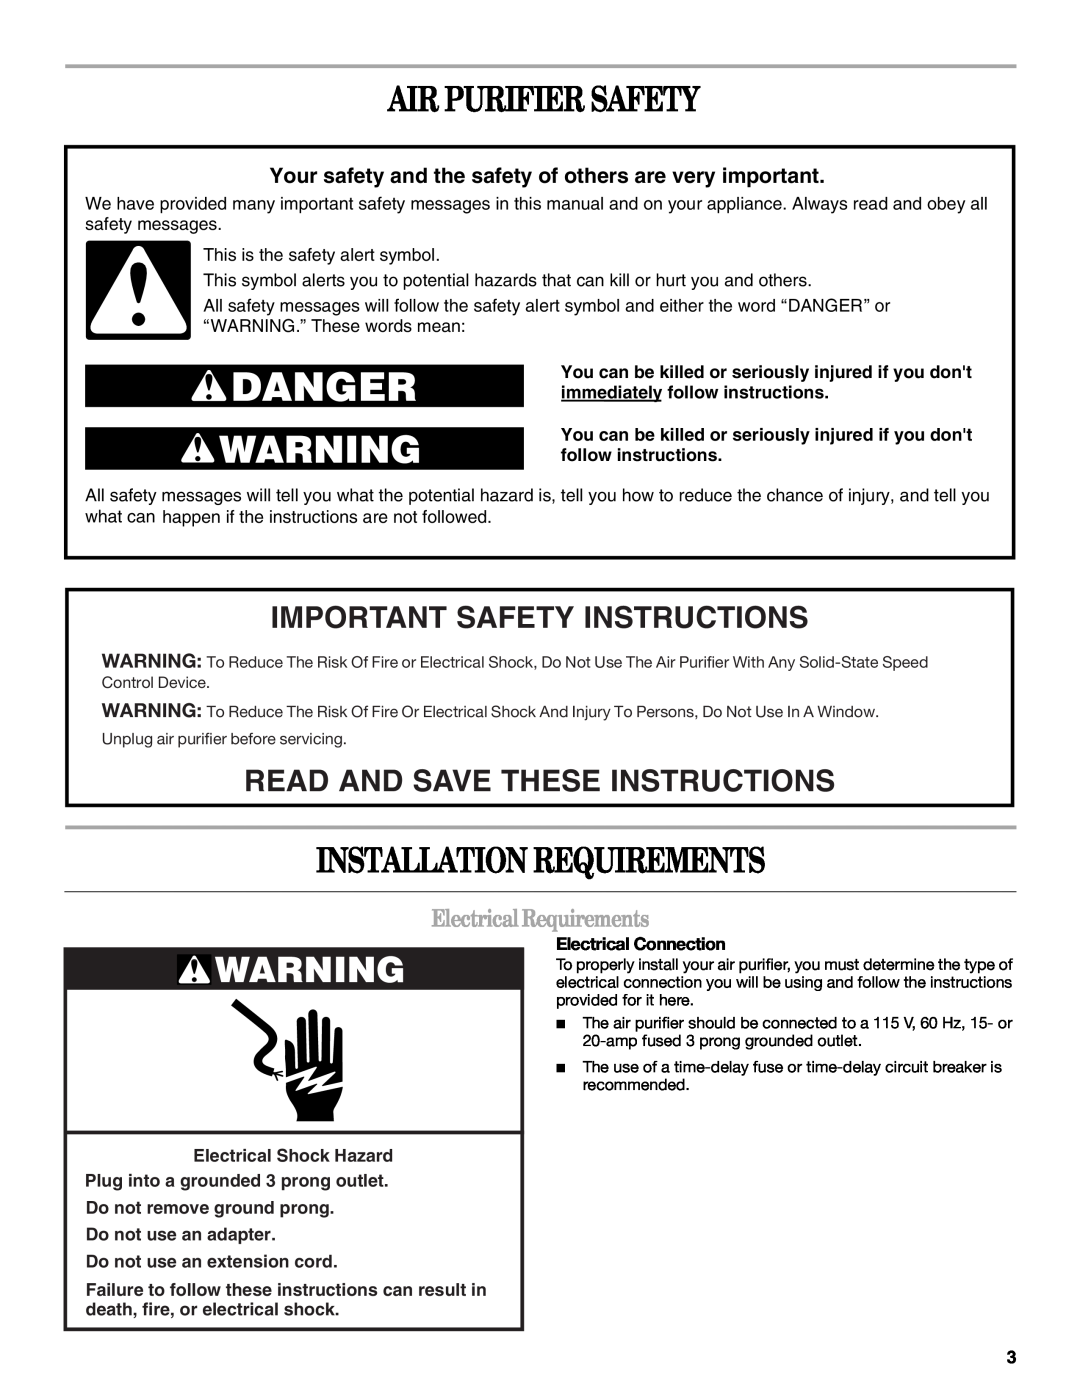 Whirlpool 1188694 Air Purifier Safety, Installation Requirements, Important Safety Instructions, ElectricalRequirements 